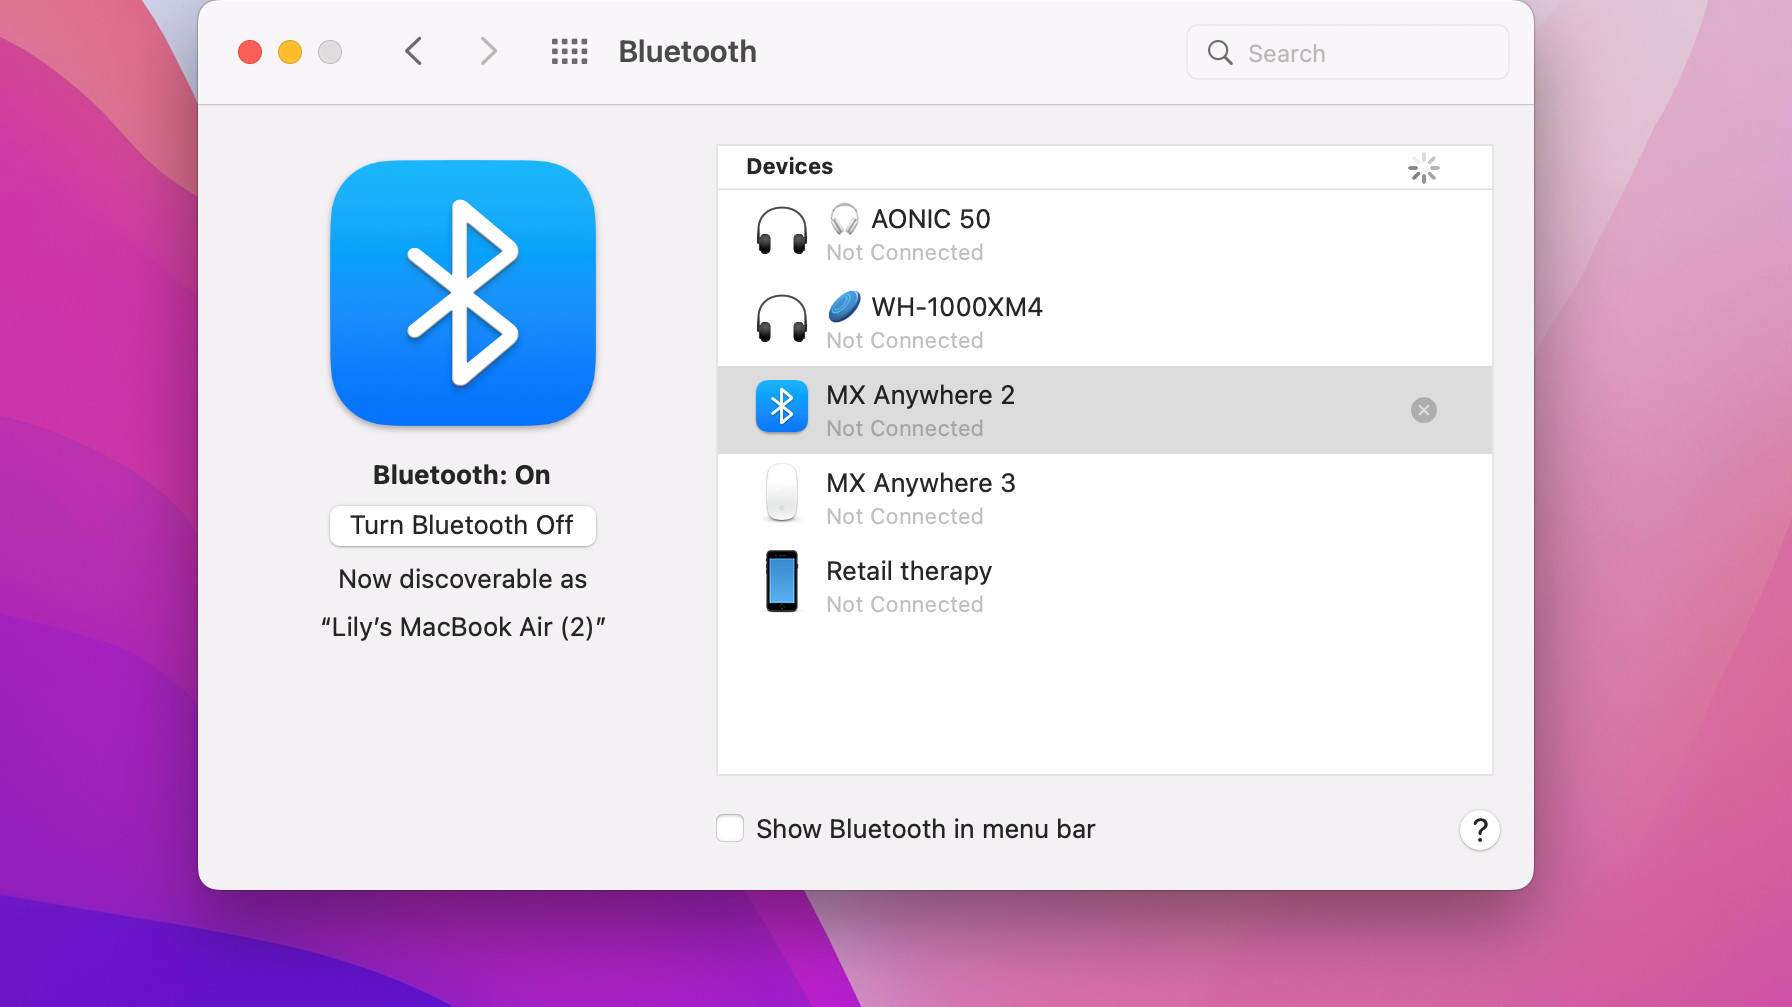 Macbook Air Bluetooth on discover mode